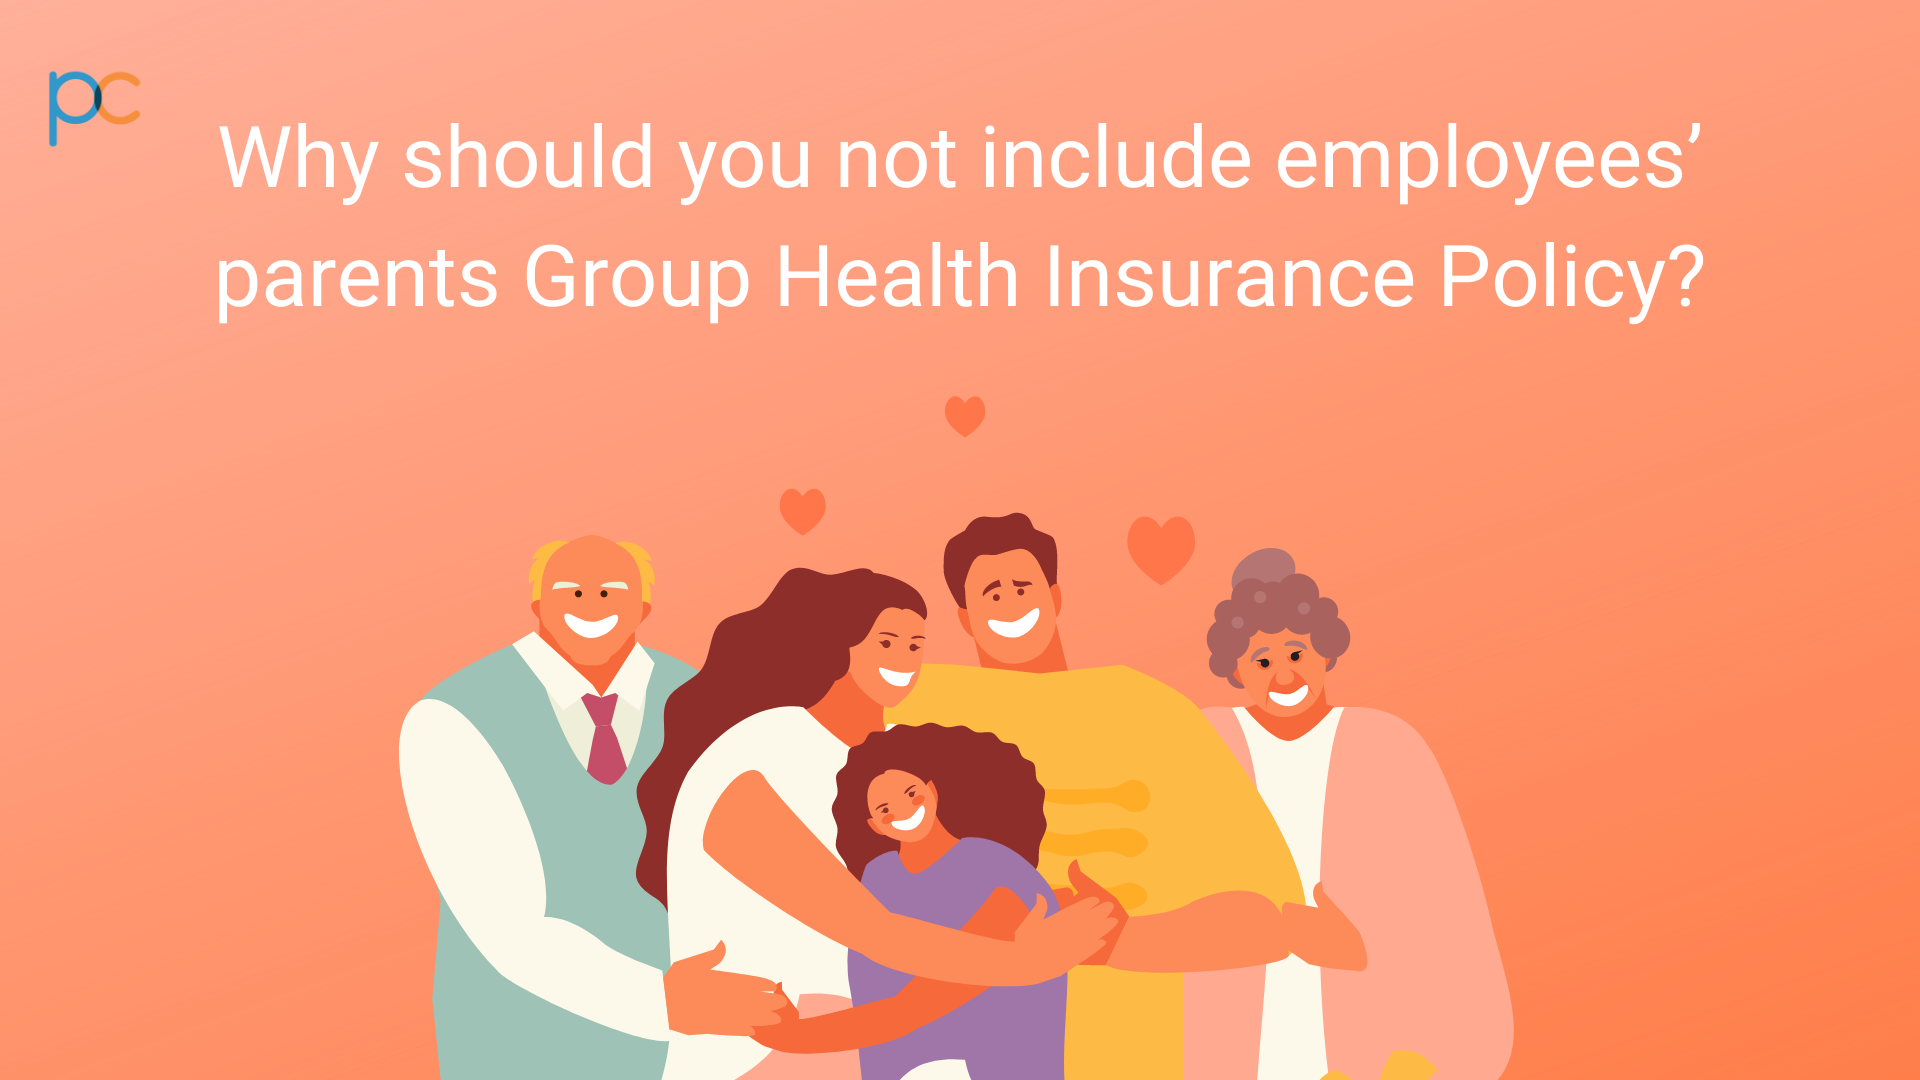 Why Should You Not Include Employees Parents Group Health Insurance Policy